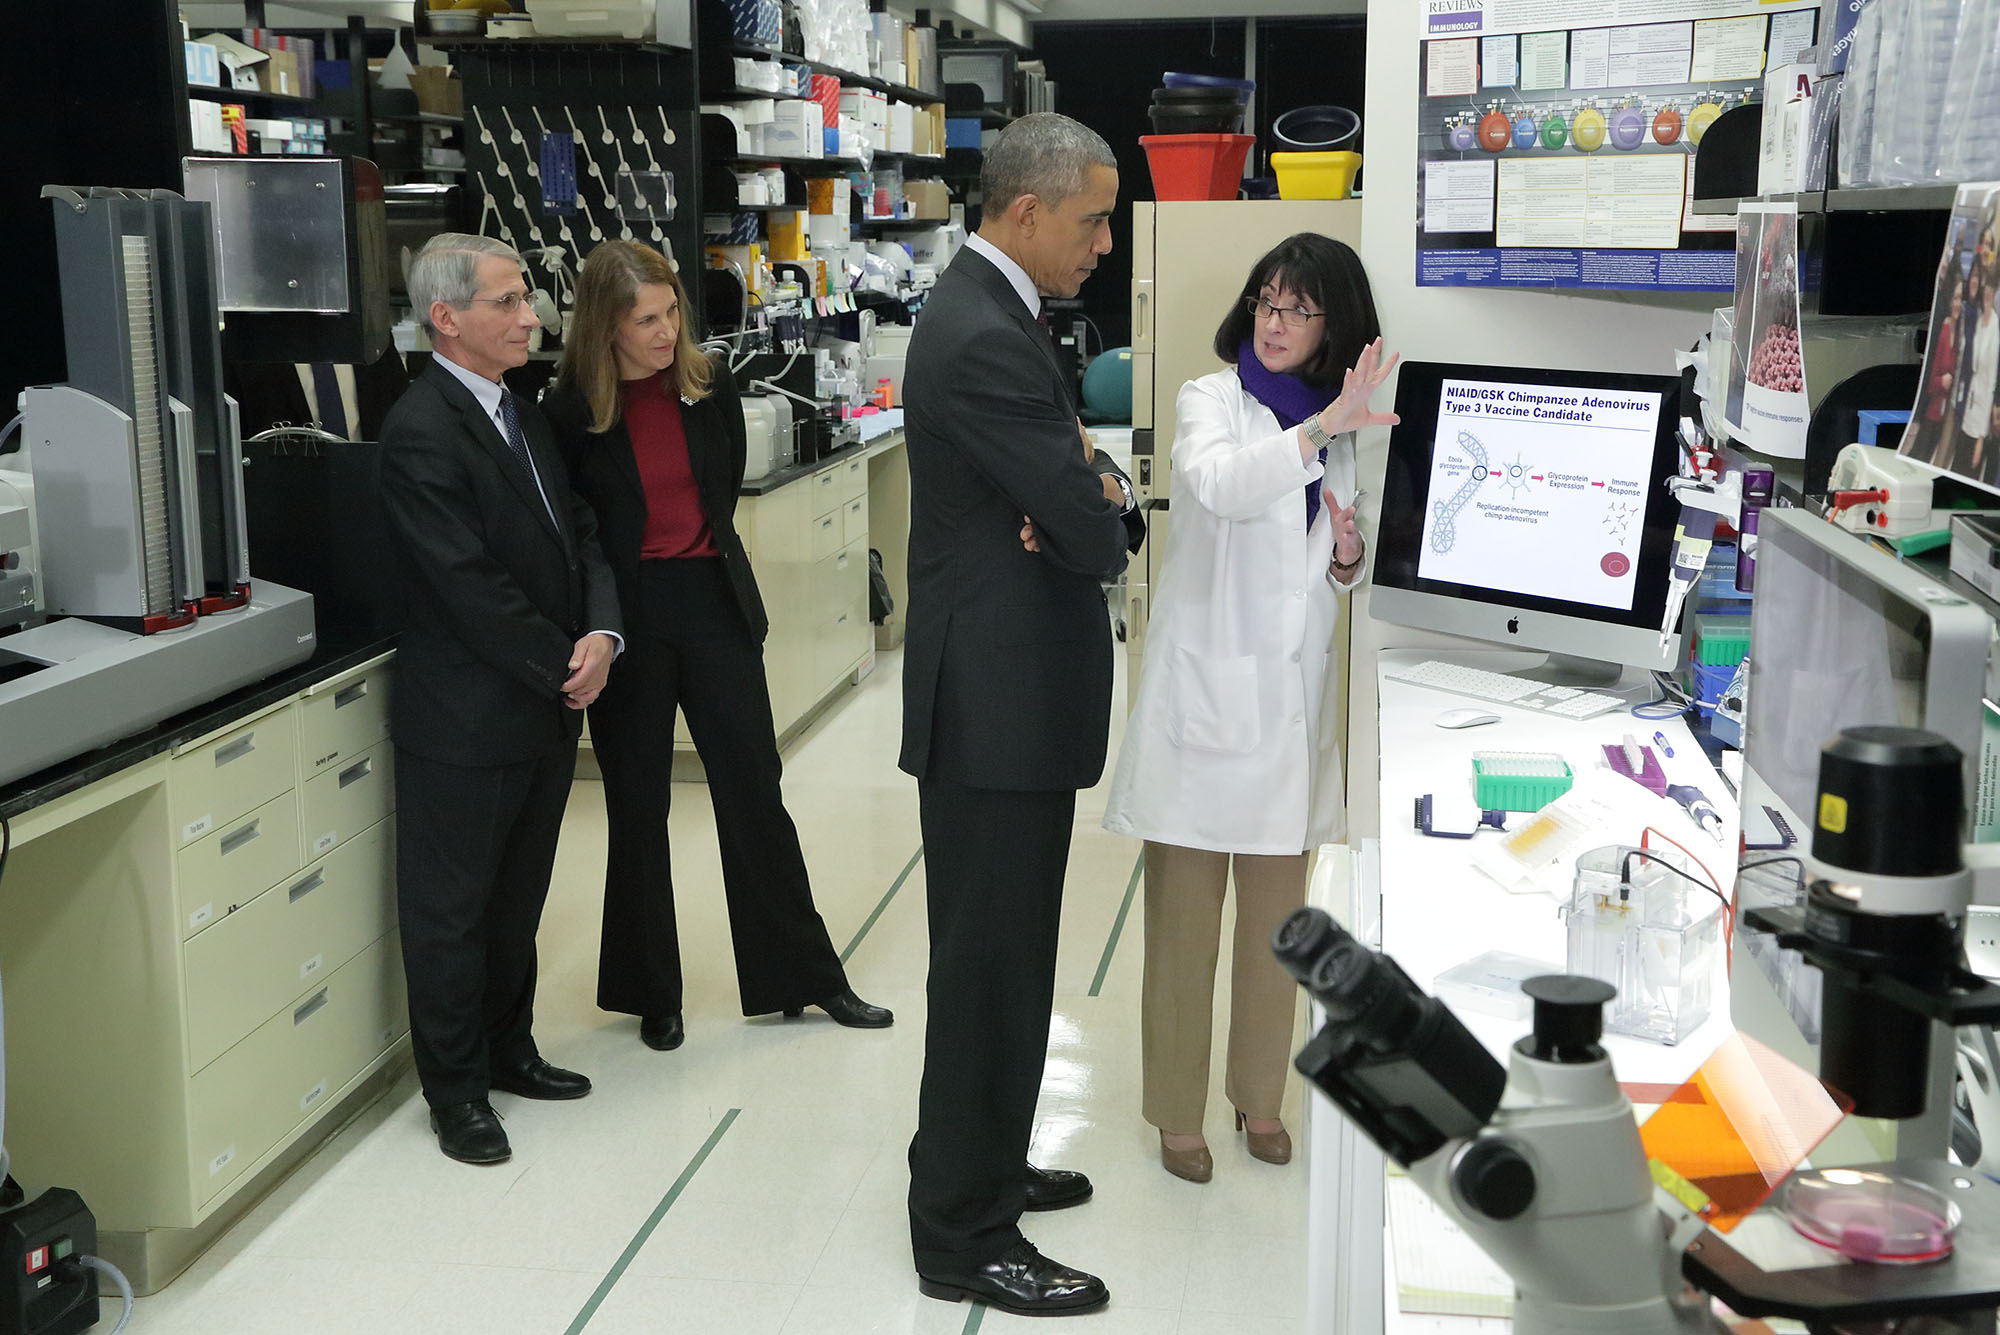 Photo of Dr. Nancy Sullivan of NIH’s National Institute of Allergy and Infectious Diseases discussing Ebola research with President Barack Obama as NIAID Director Dr. Anthony Fauci and HHS Secretary Sylvia Burwell look on.